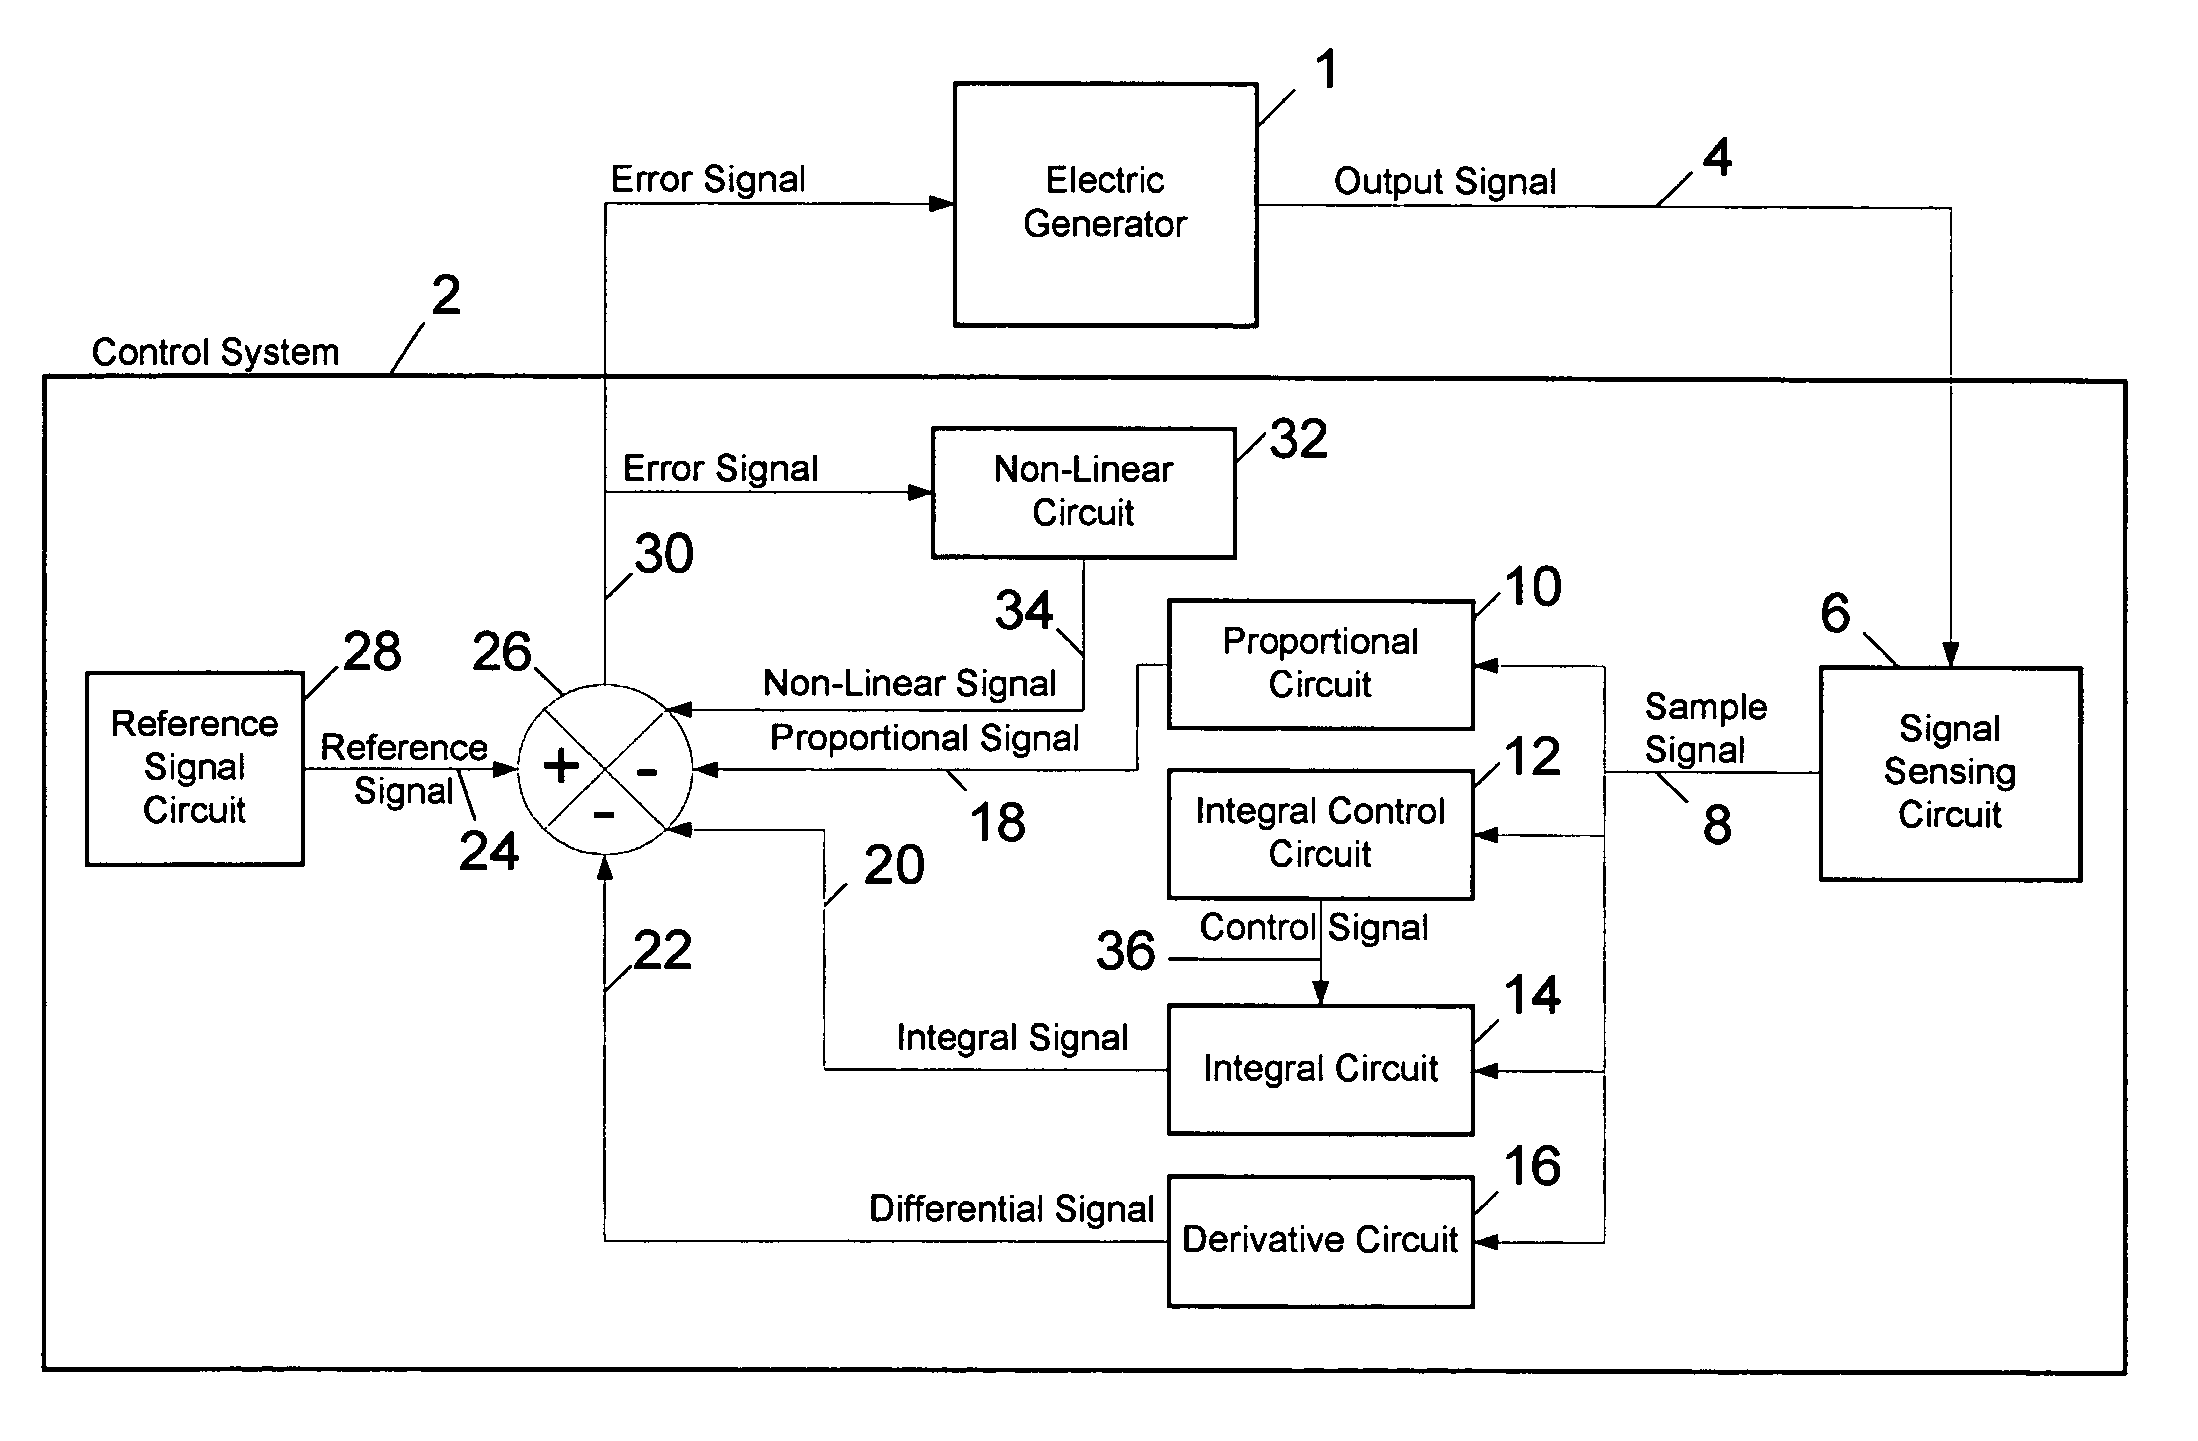 Control system for an electric machine